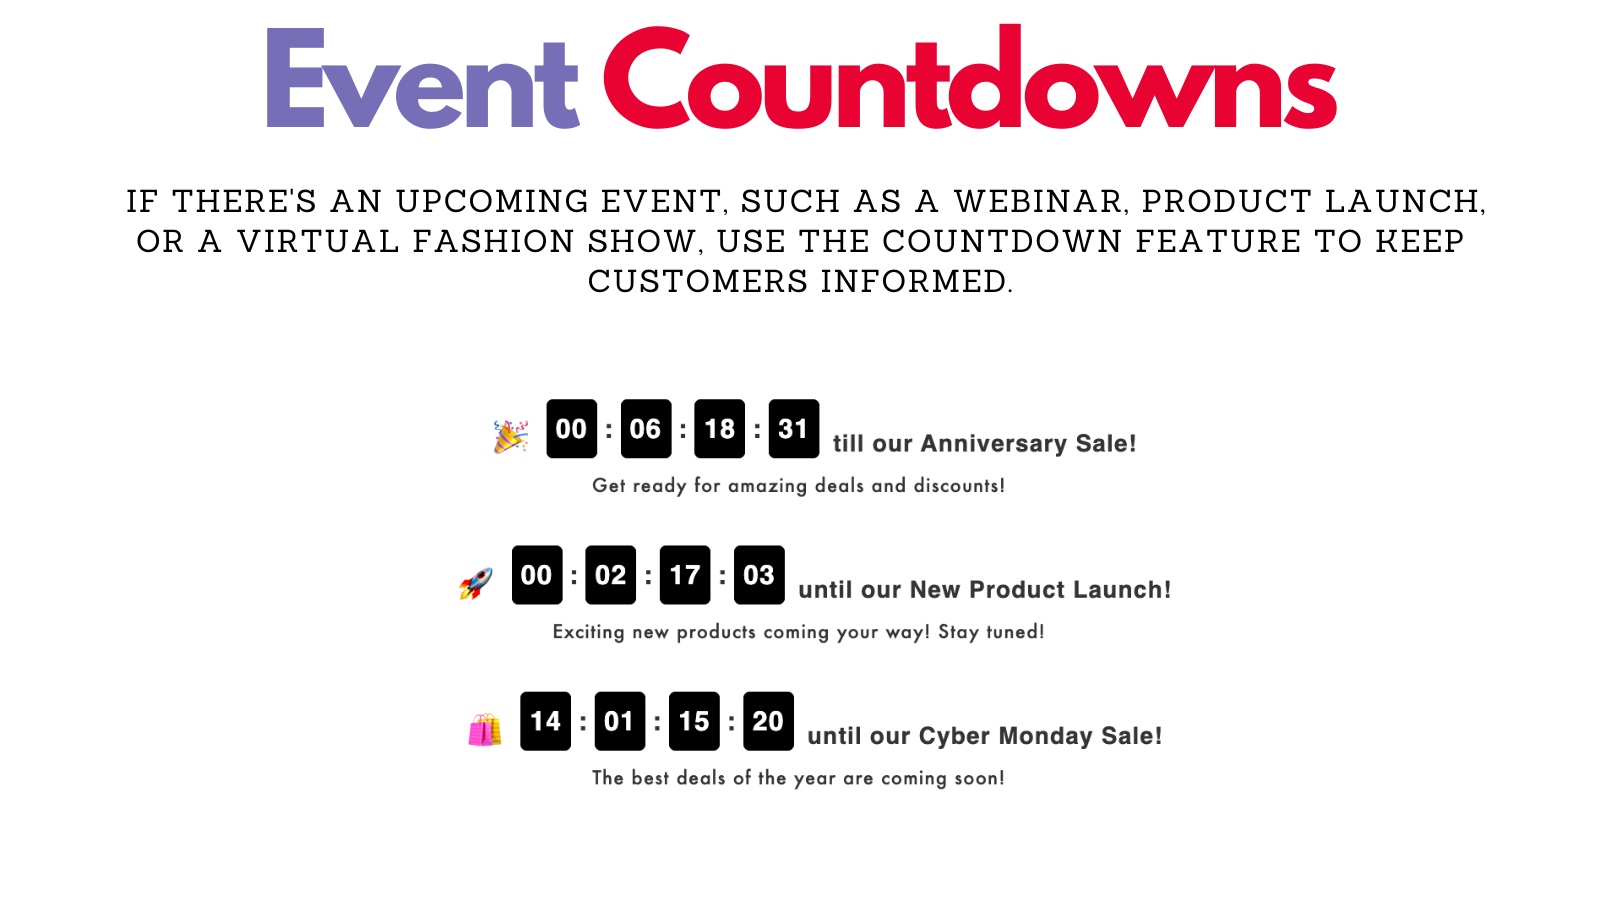 Event Countdown examples